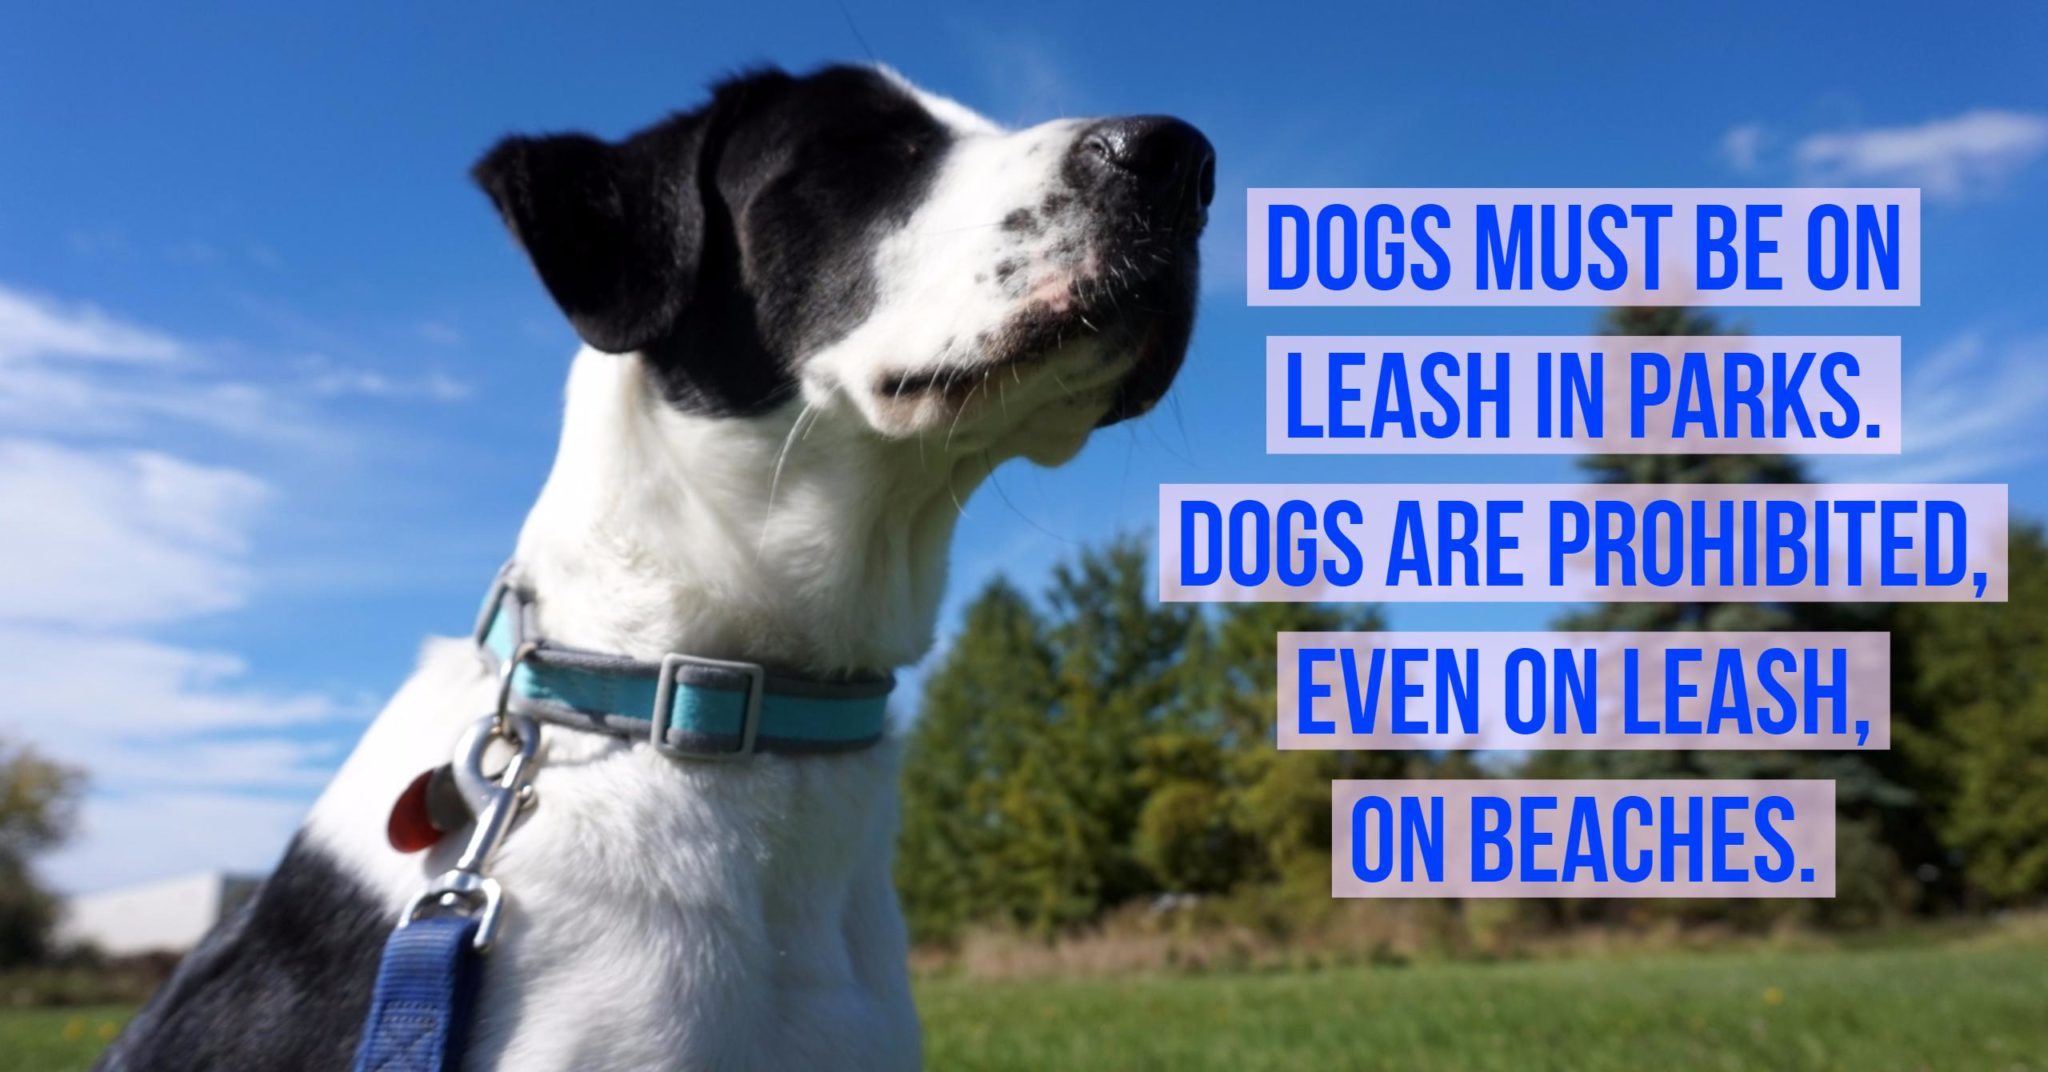 Dogs must be on leash in parks - Parkways